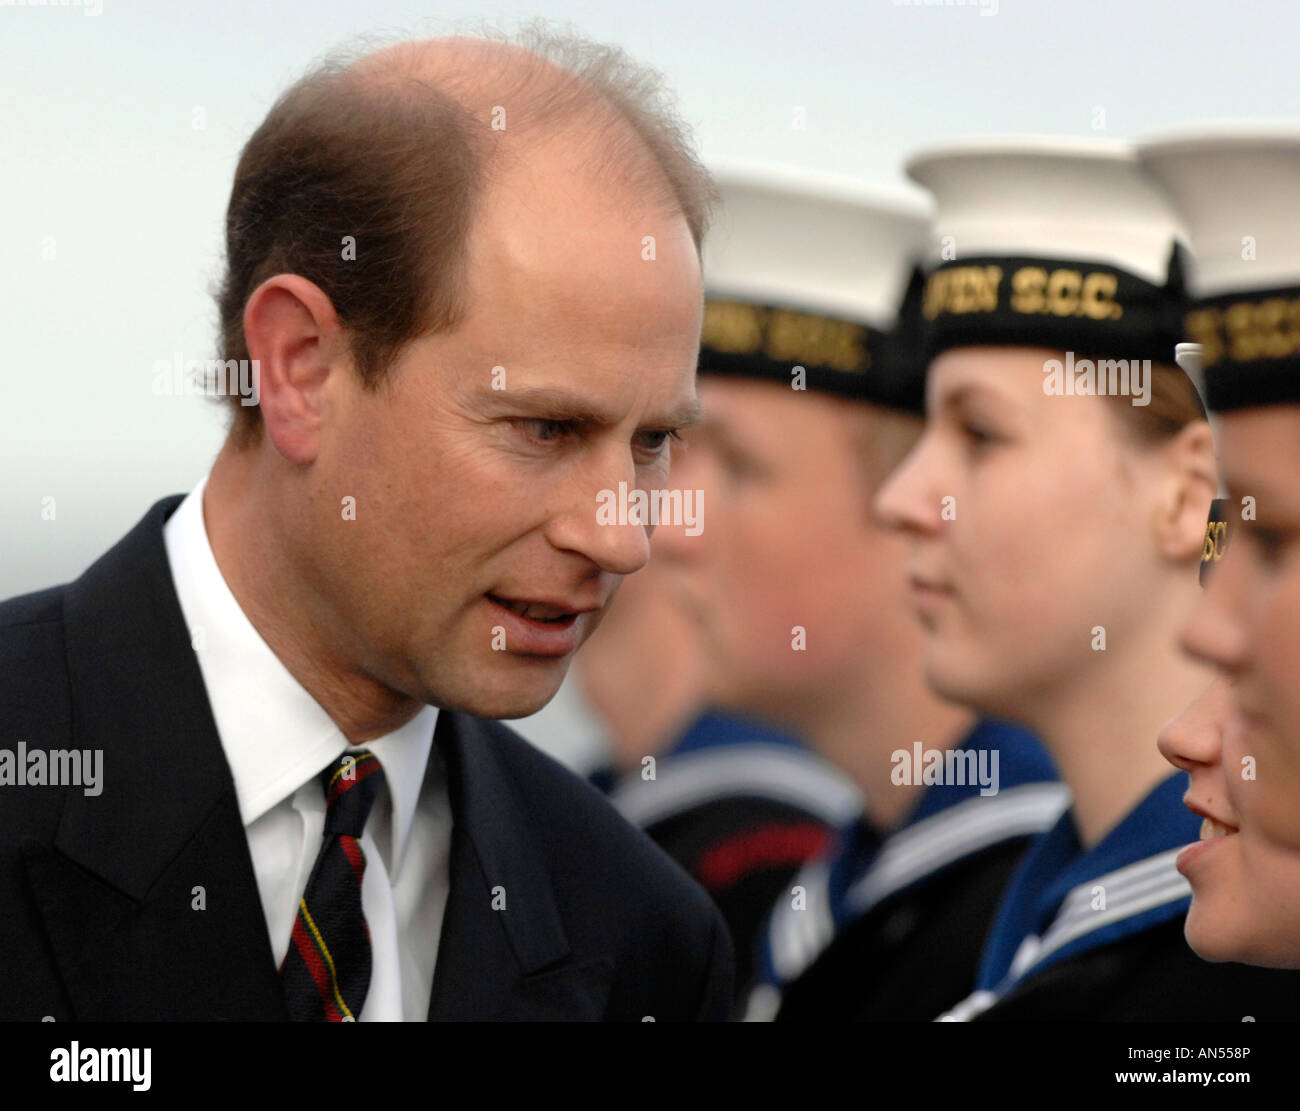 Prince Edward inspecting cadets Stock Photo